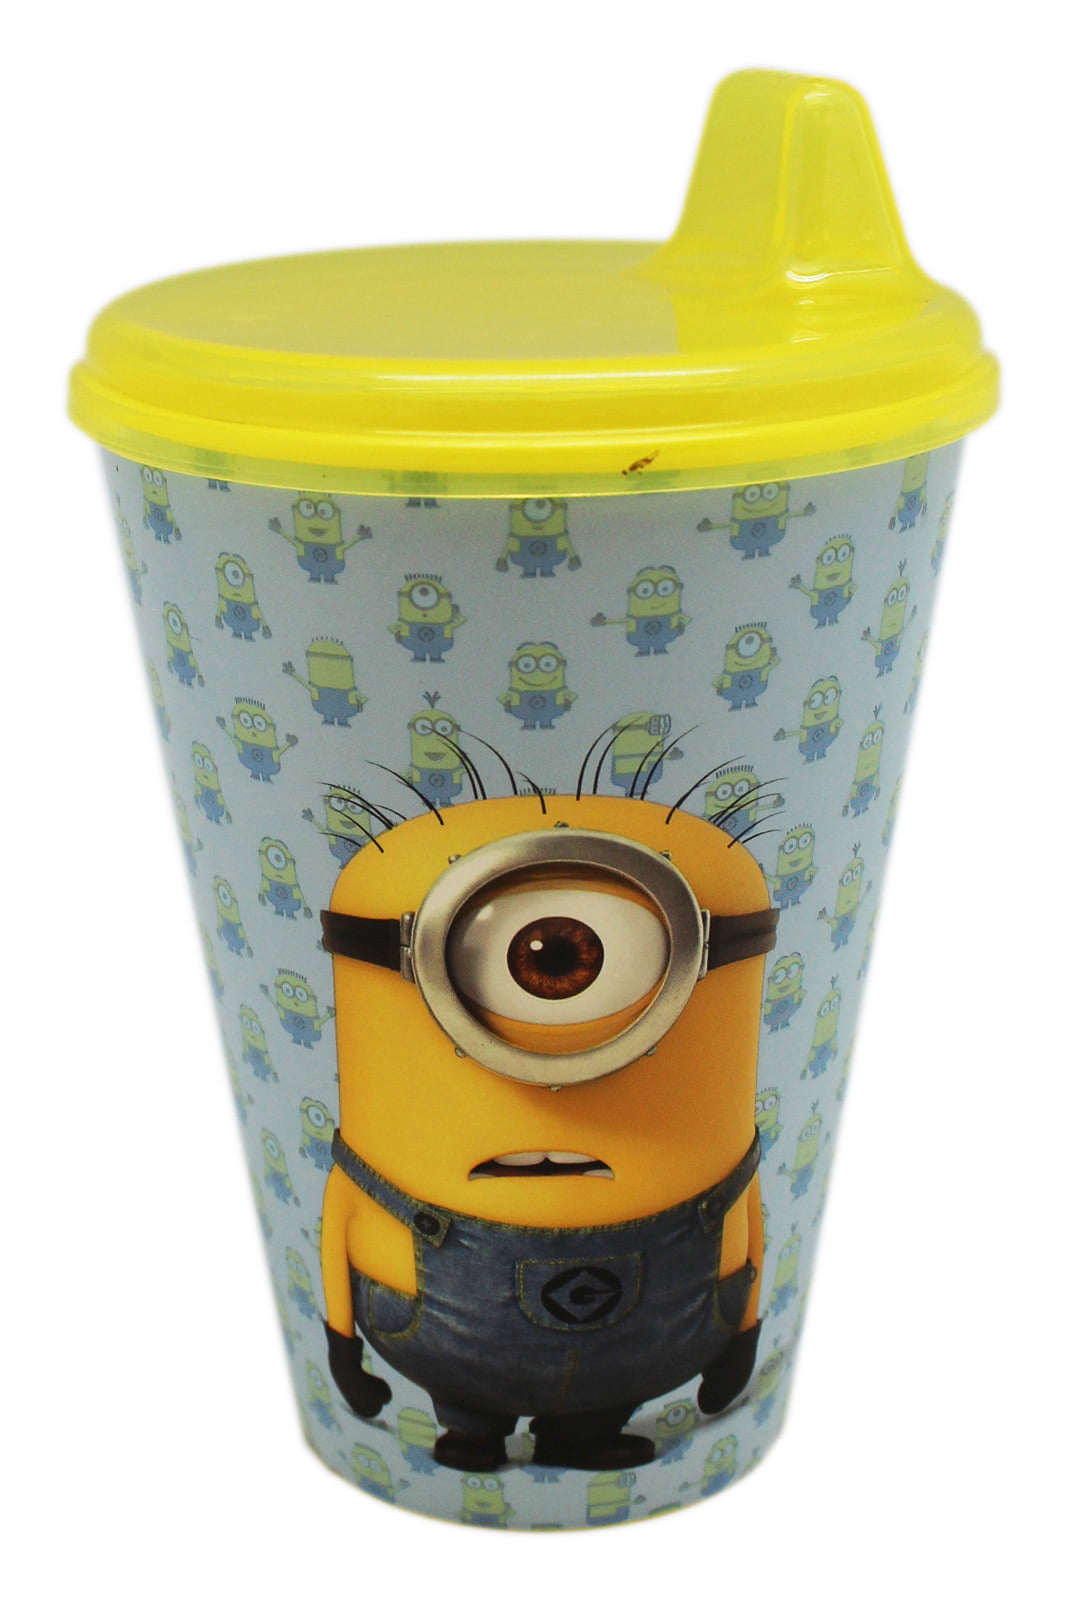 Despicable Me Minions Drink Cup & Snack Container All In One As Seen on TV 